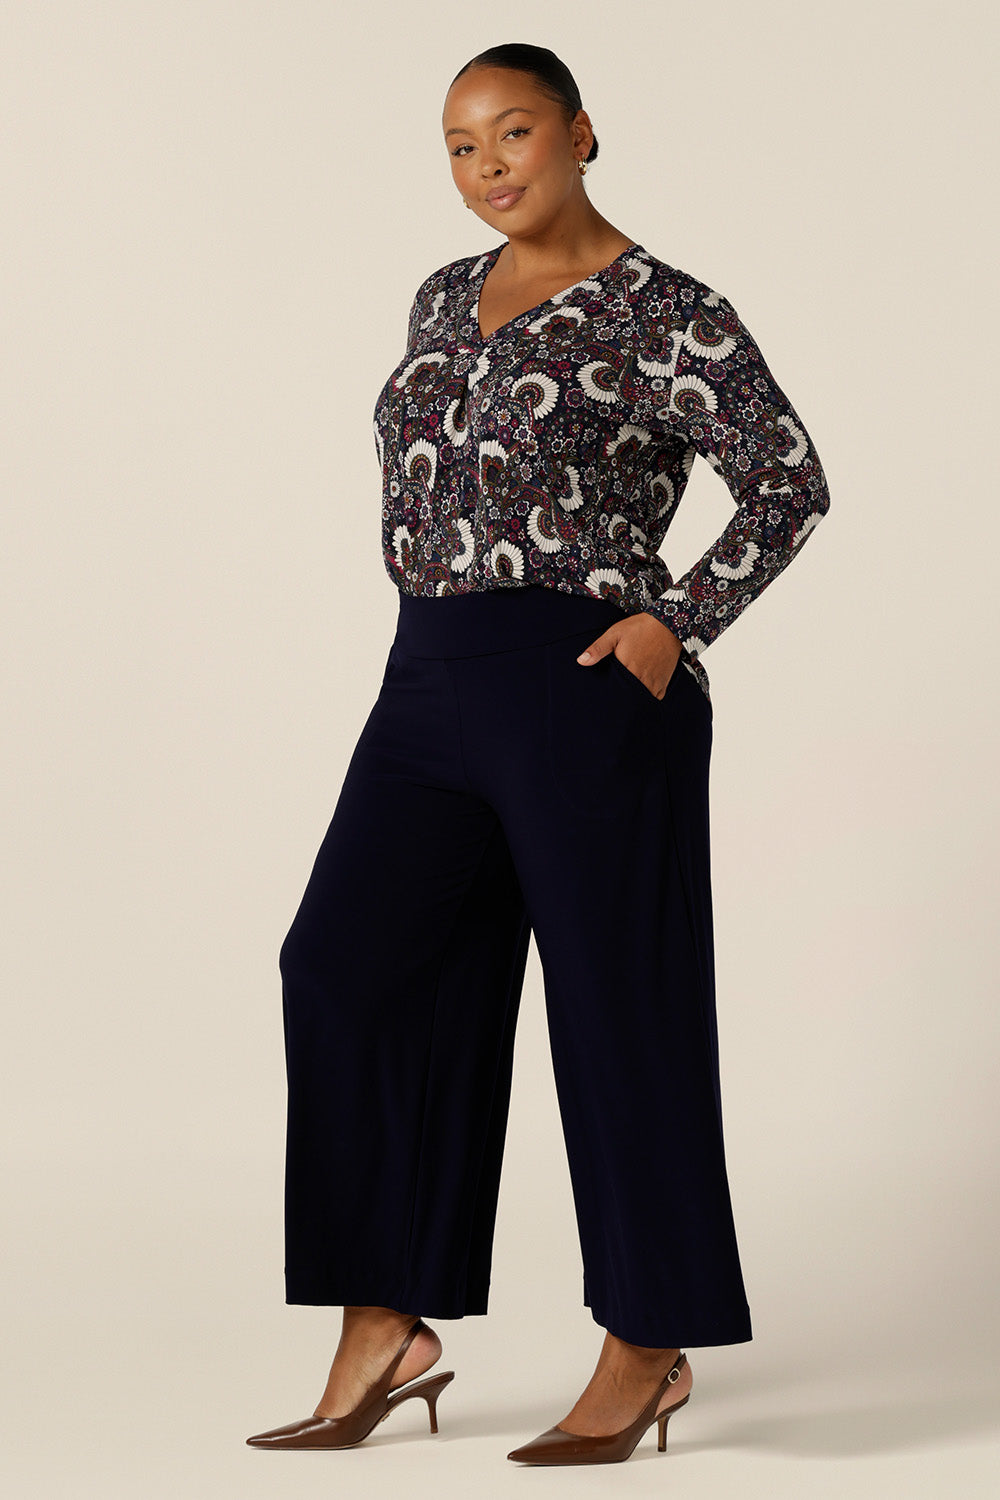 A size 18, plus size woman wears a long-sleeve, V-neck top in paisley print jersey. Worn with wide leg navy pants, this work top s comfortable for corporate and weekend wear.  Made in Australia by Australian and New Zealand women's clothing label, L&F.